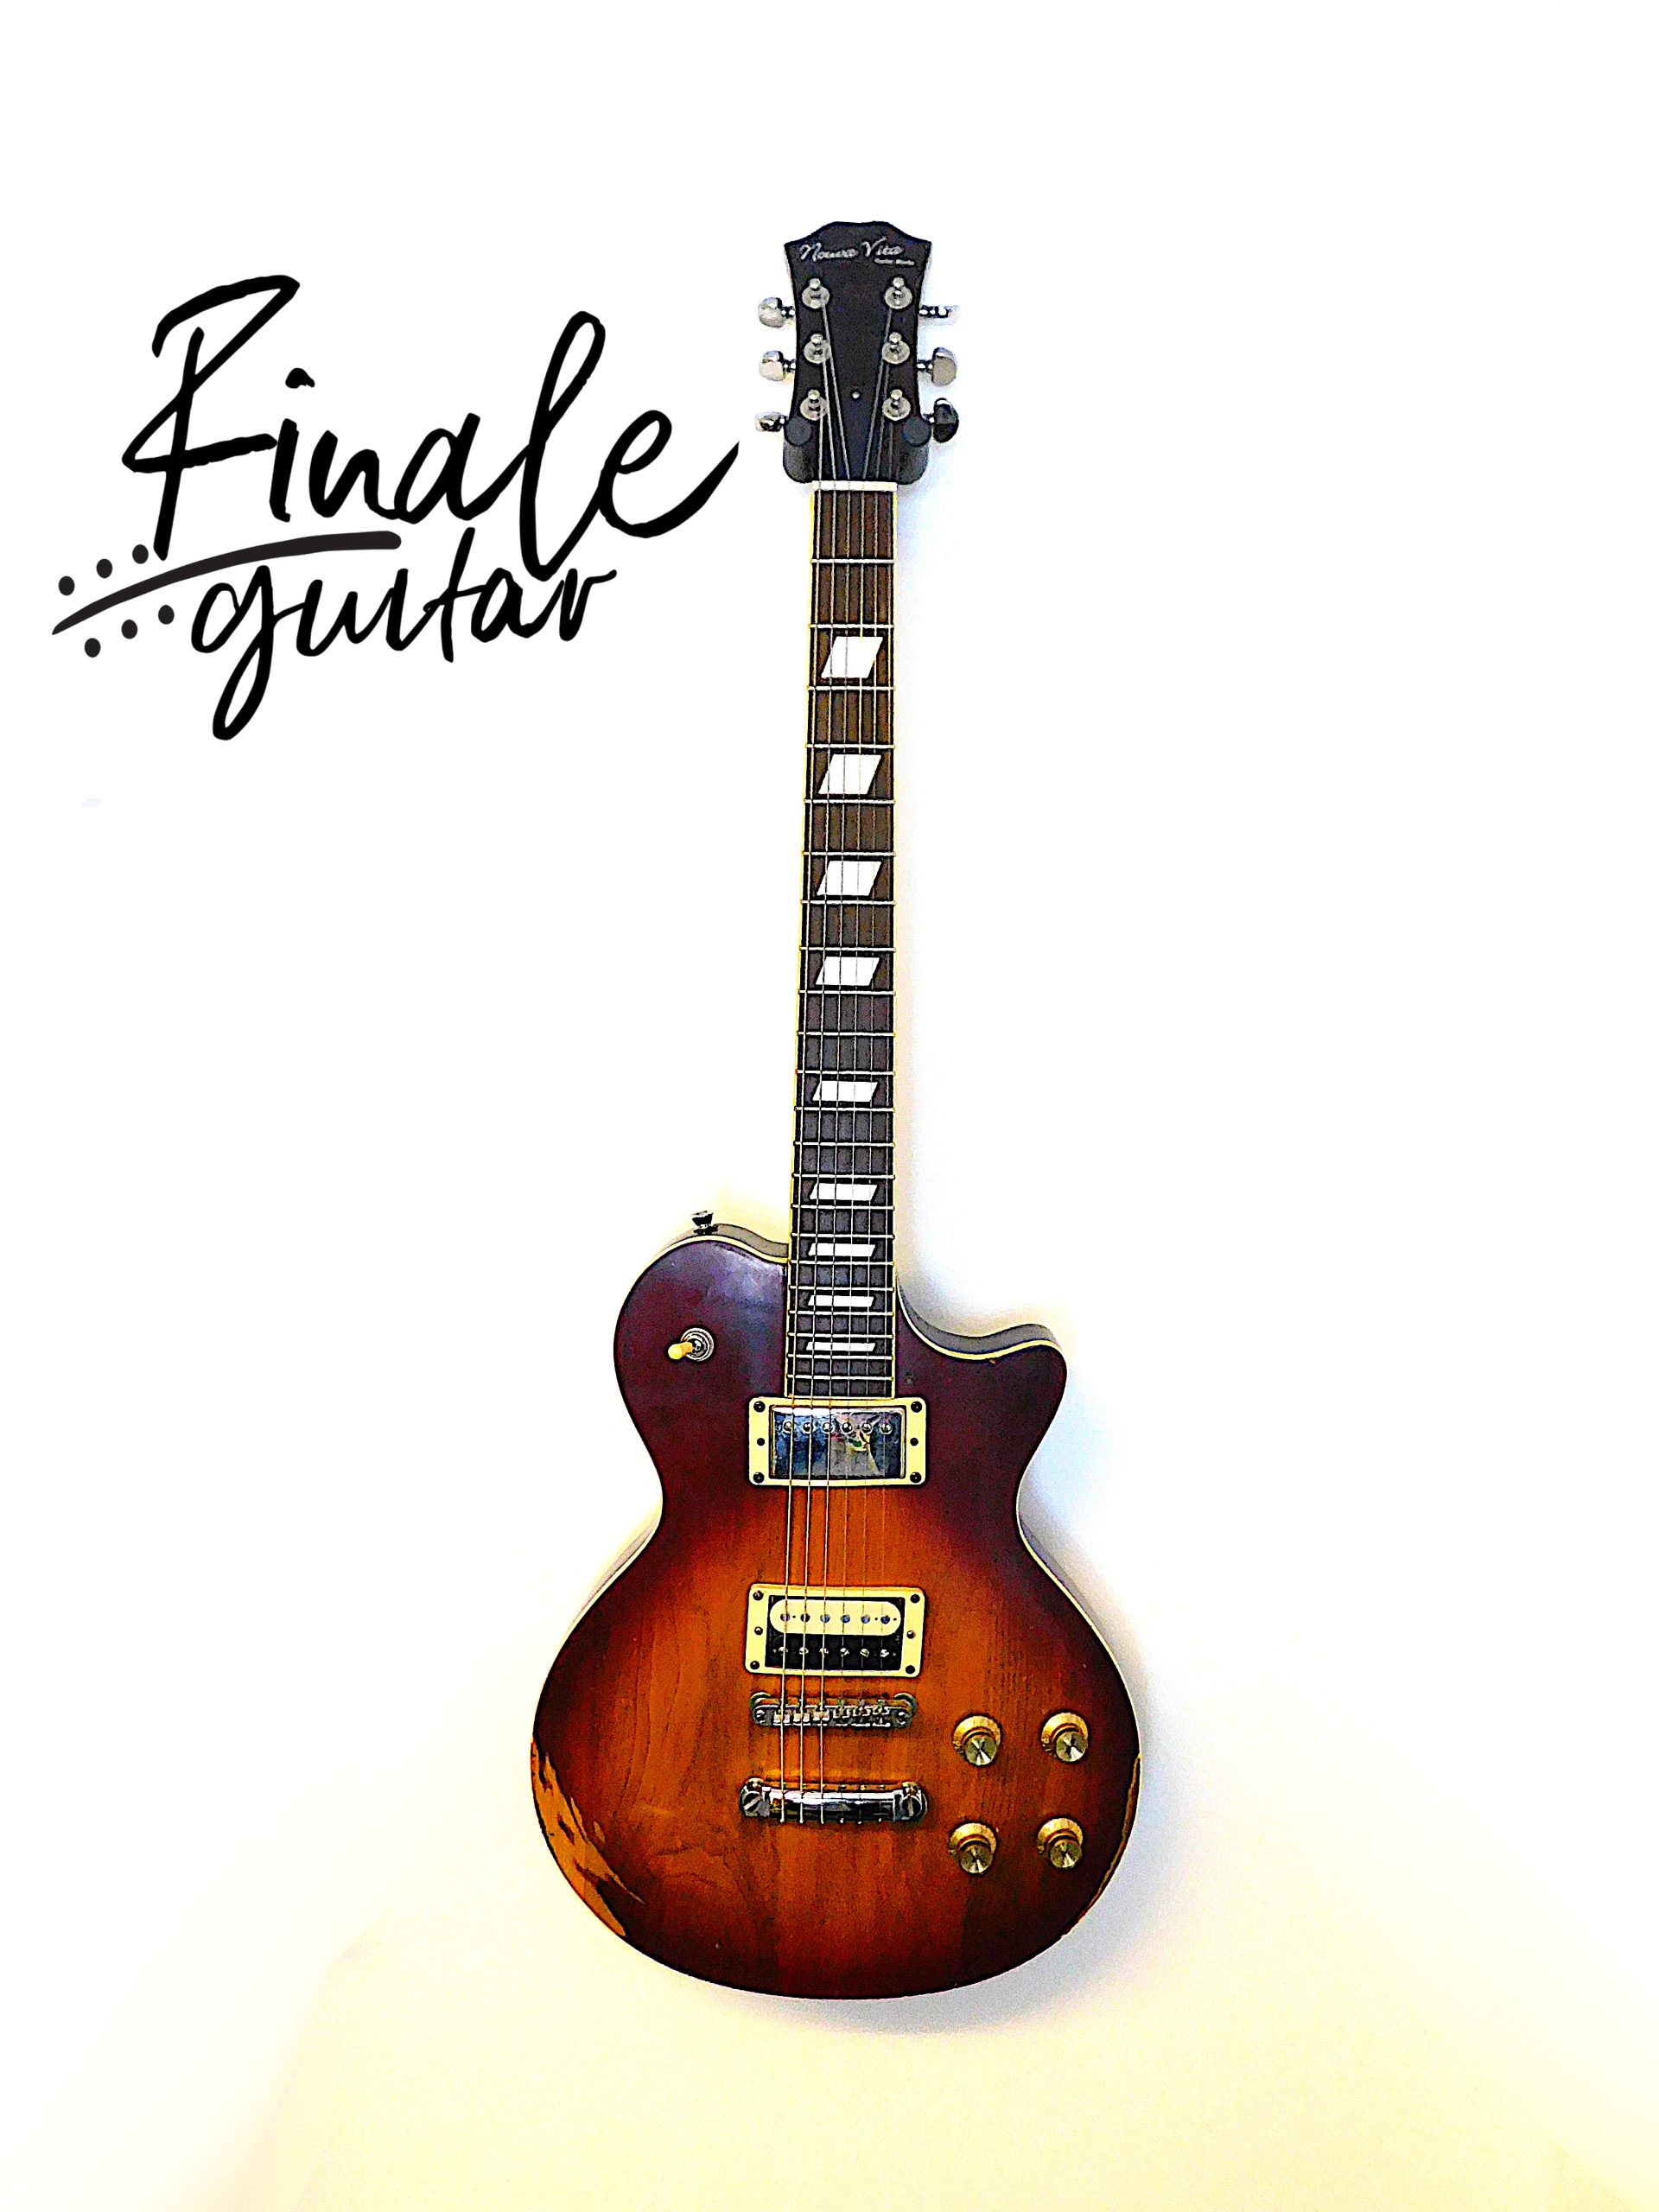 Nuova Vita Westfield Les Paul with Iron Gear Rolling Mill and Bloodstone hand wound high output bridge, CTS electrics for sale in our Sheffield guitar shop, Finale Guitar